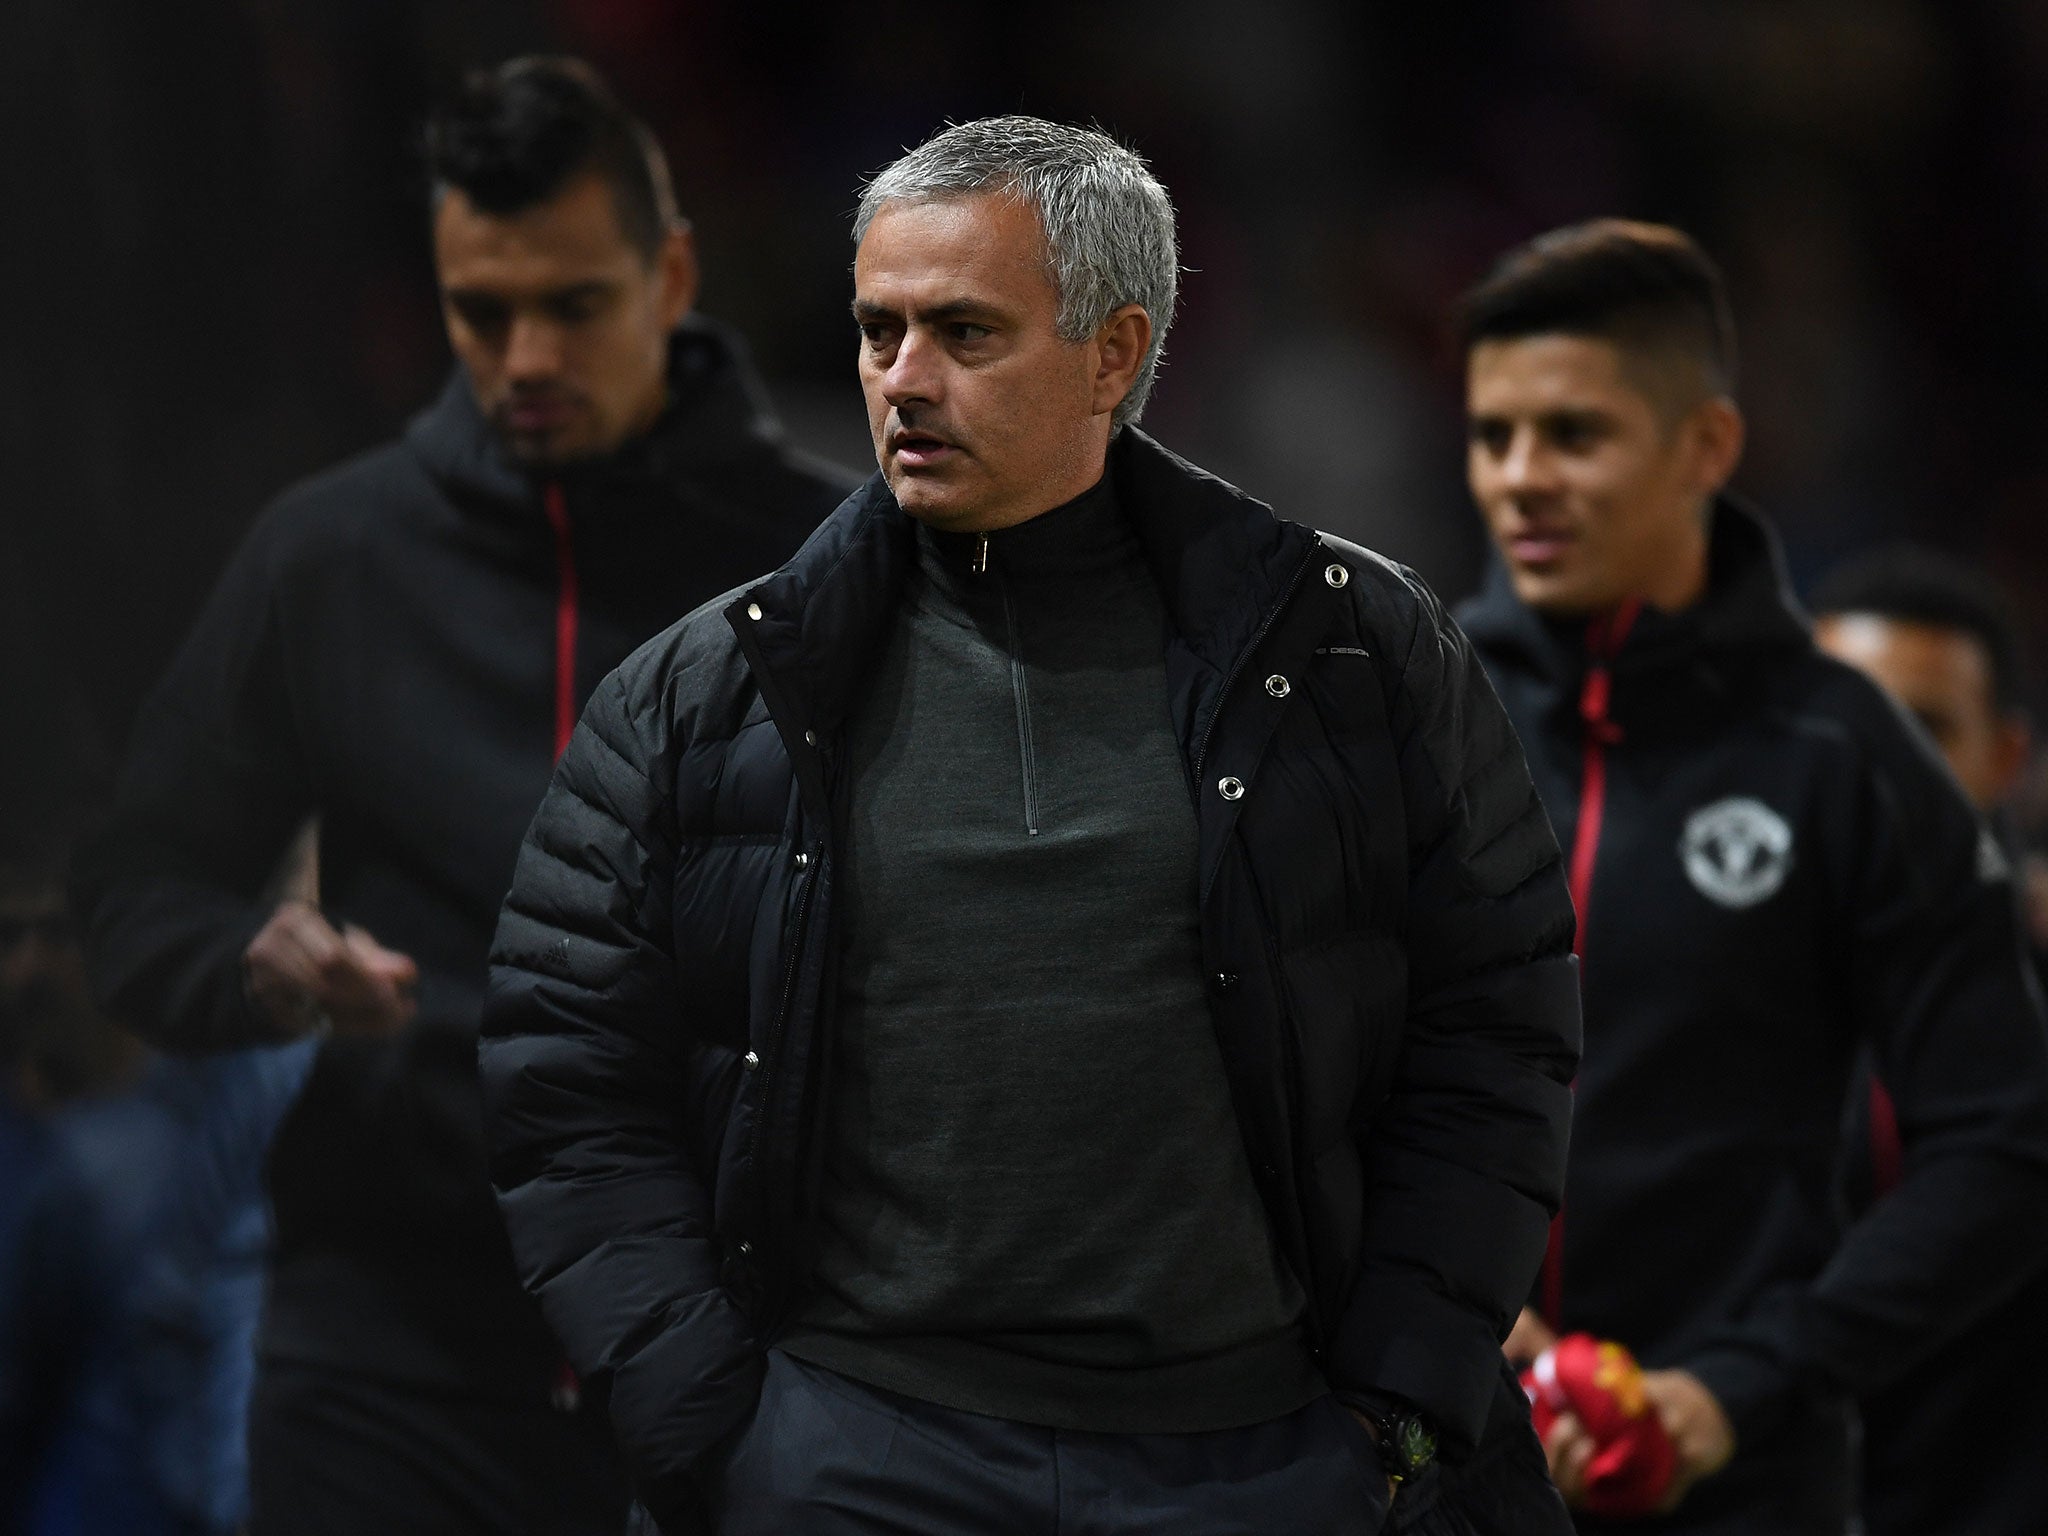 Jose Mourinho has struggled to adjust to life in Manchester